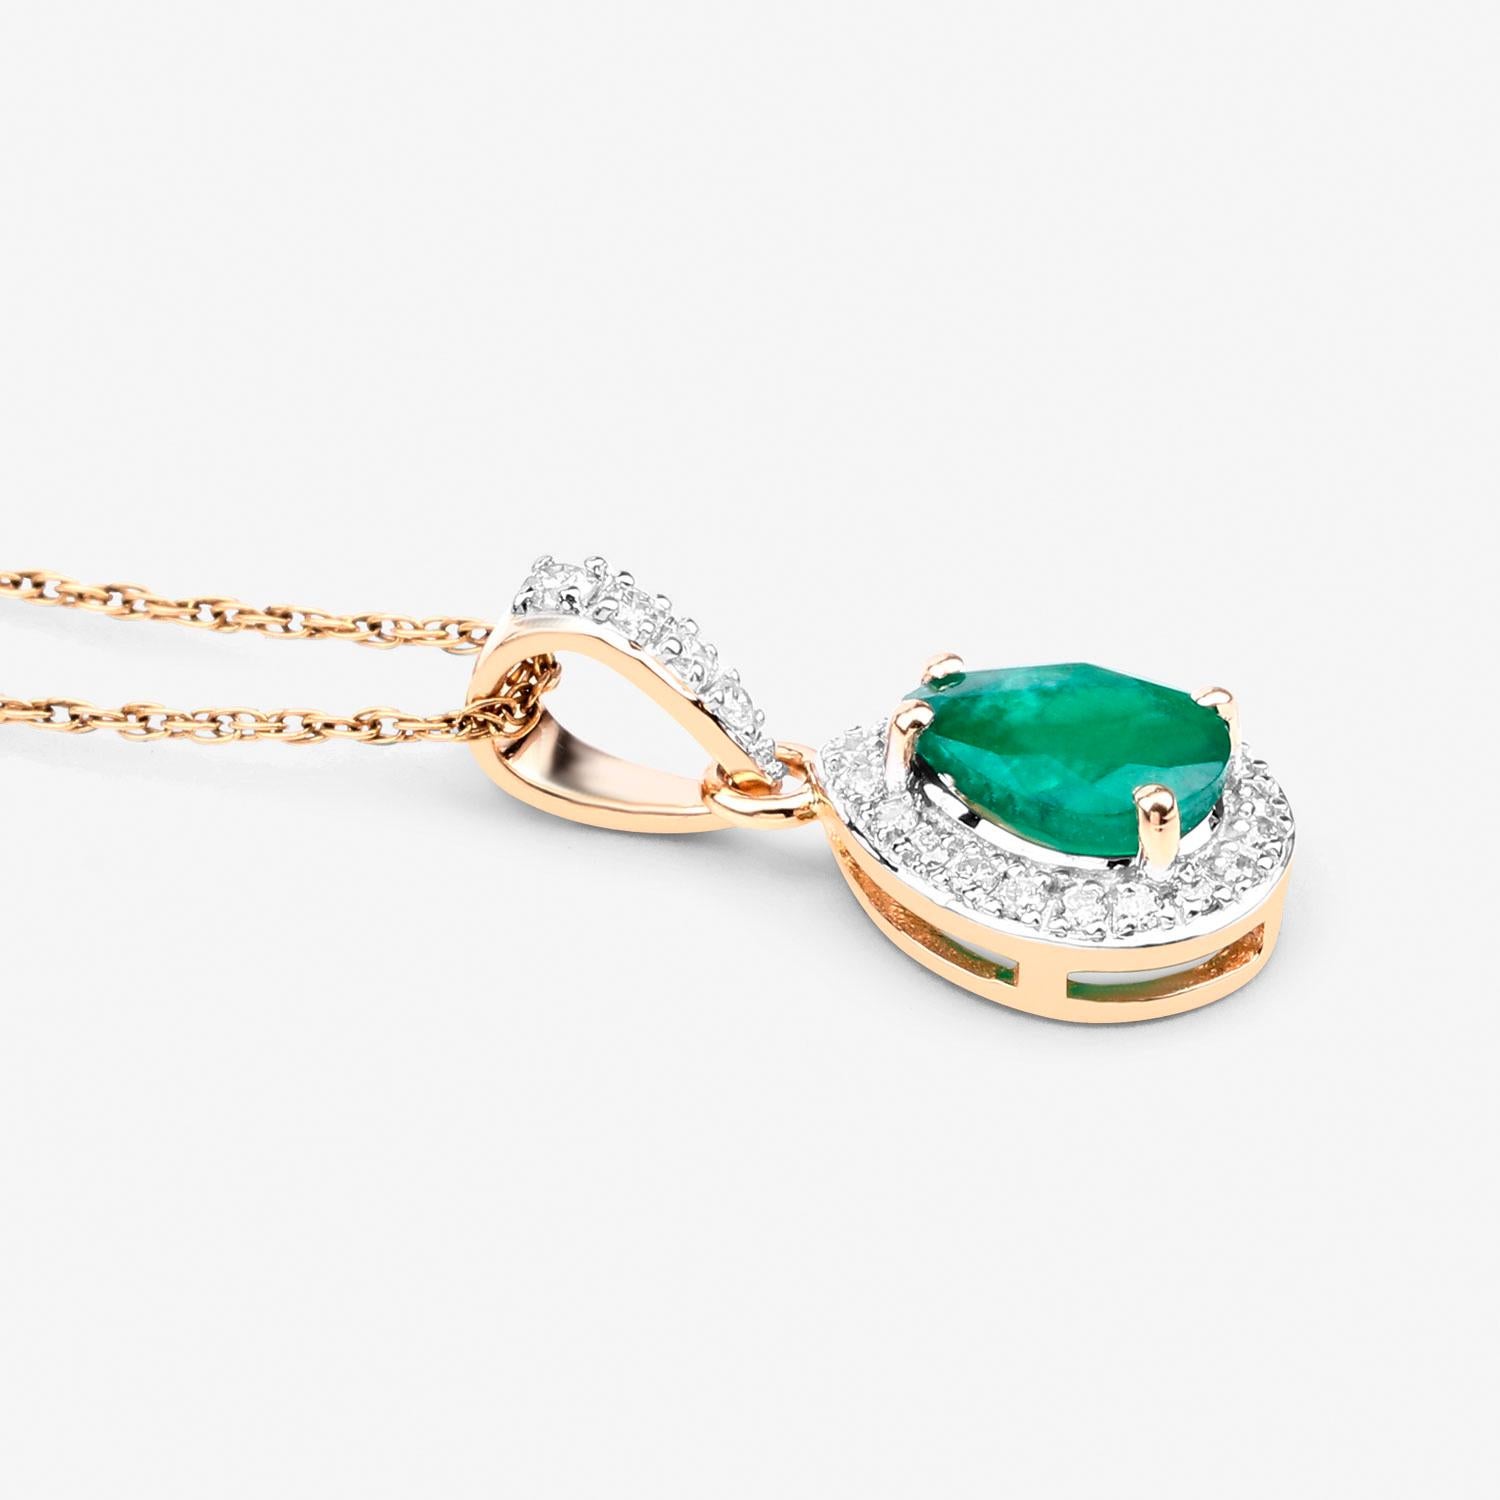 Zambian Emerald Pendant Necklace With Diamonds 0.77 Carats 14K Yellow Gold In Excellent Condition For Sale In Laguna Niguel, CA